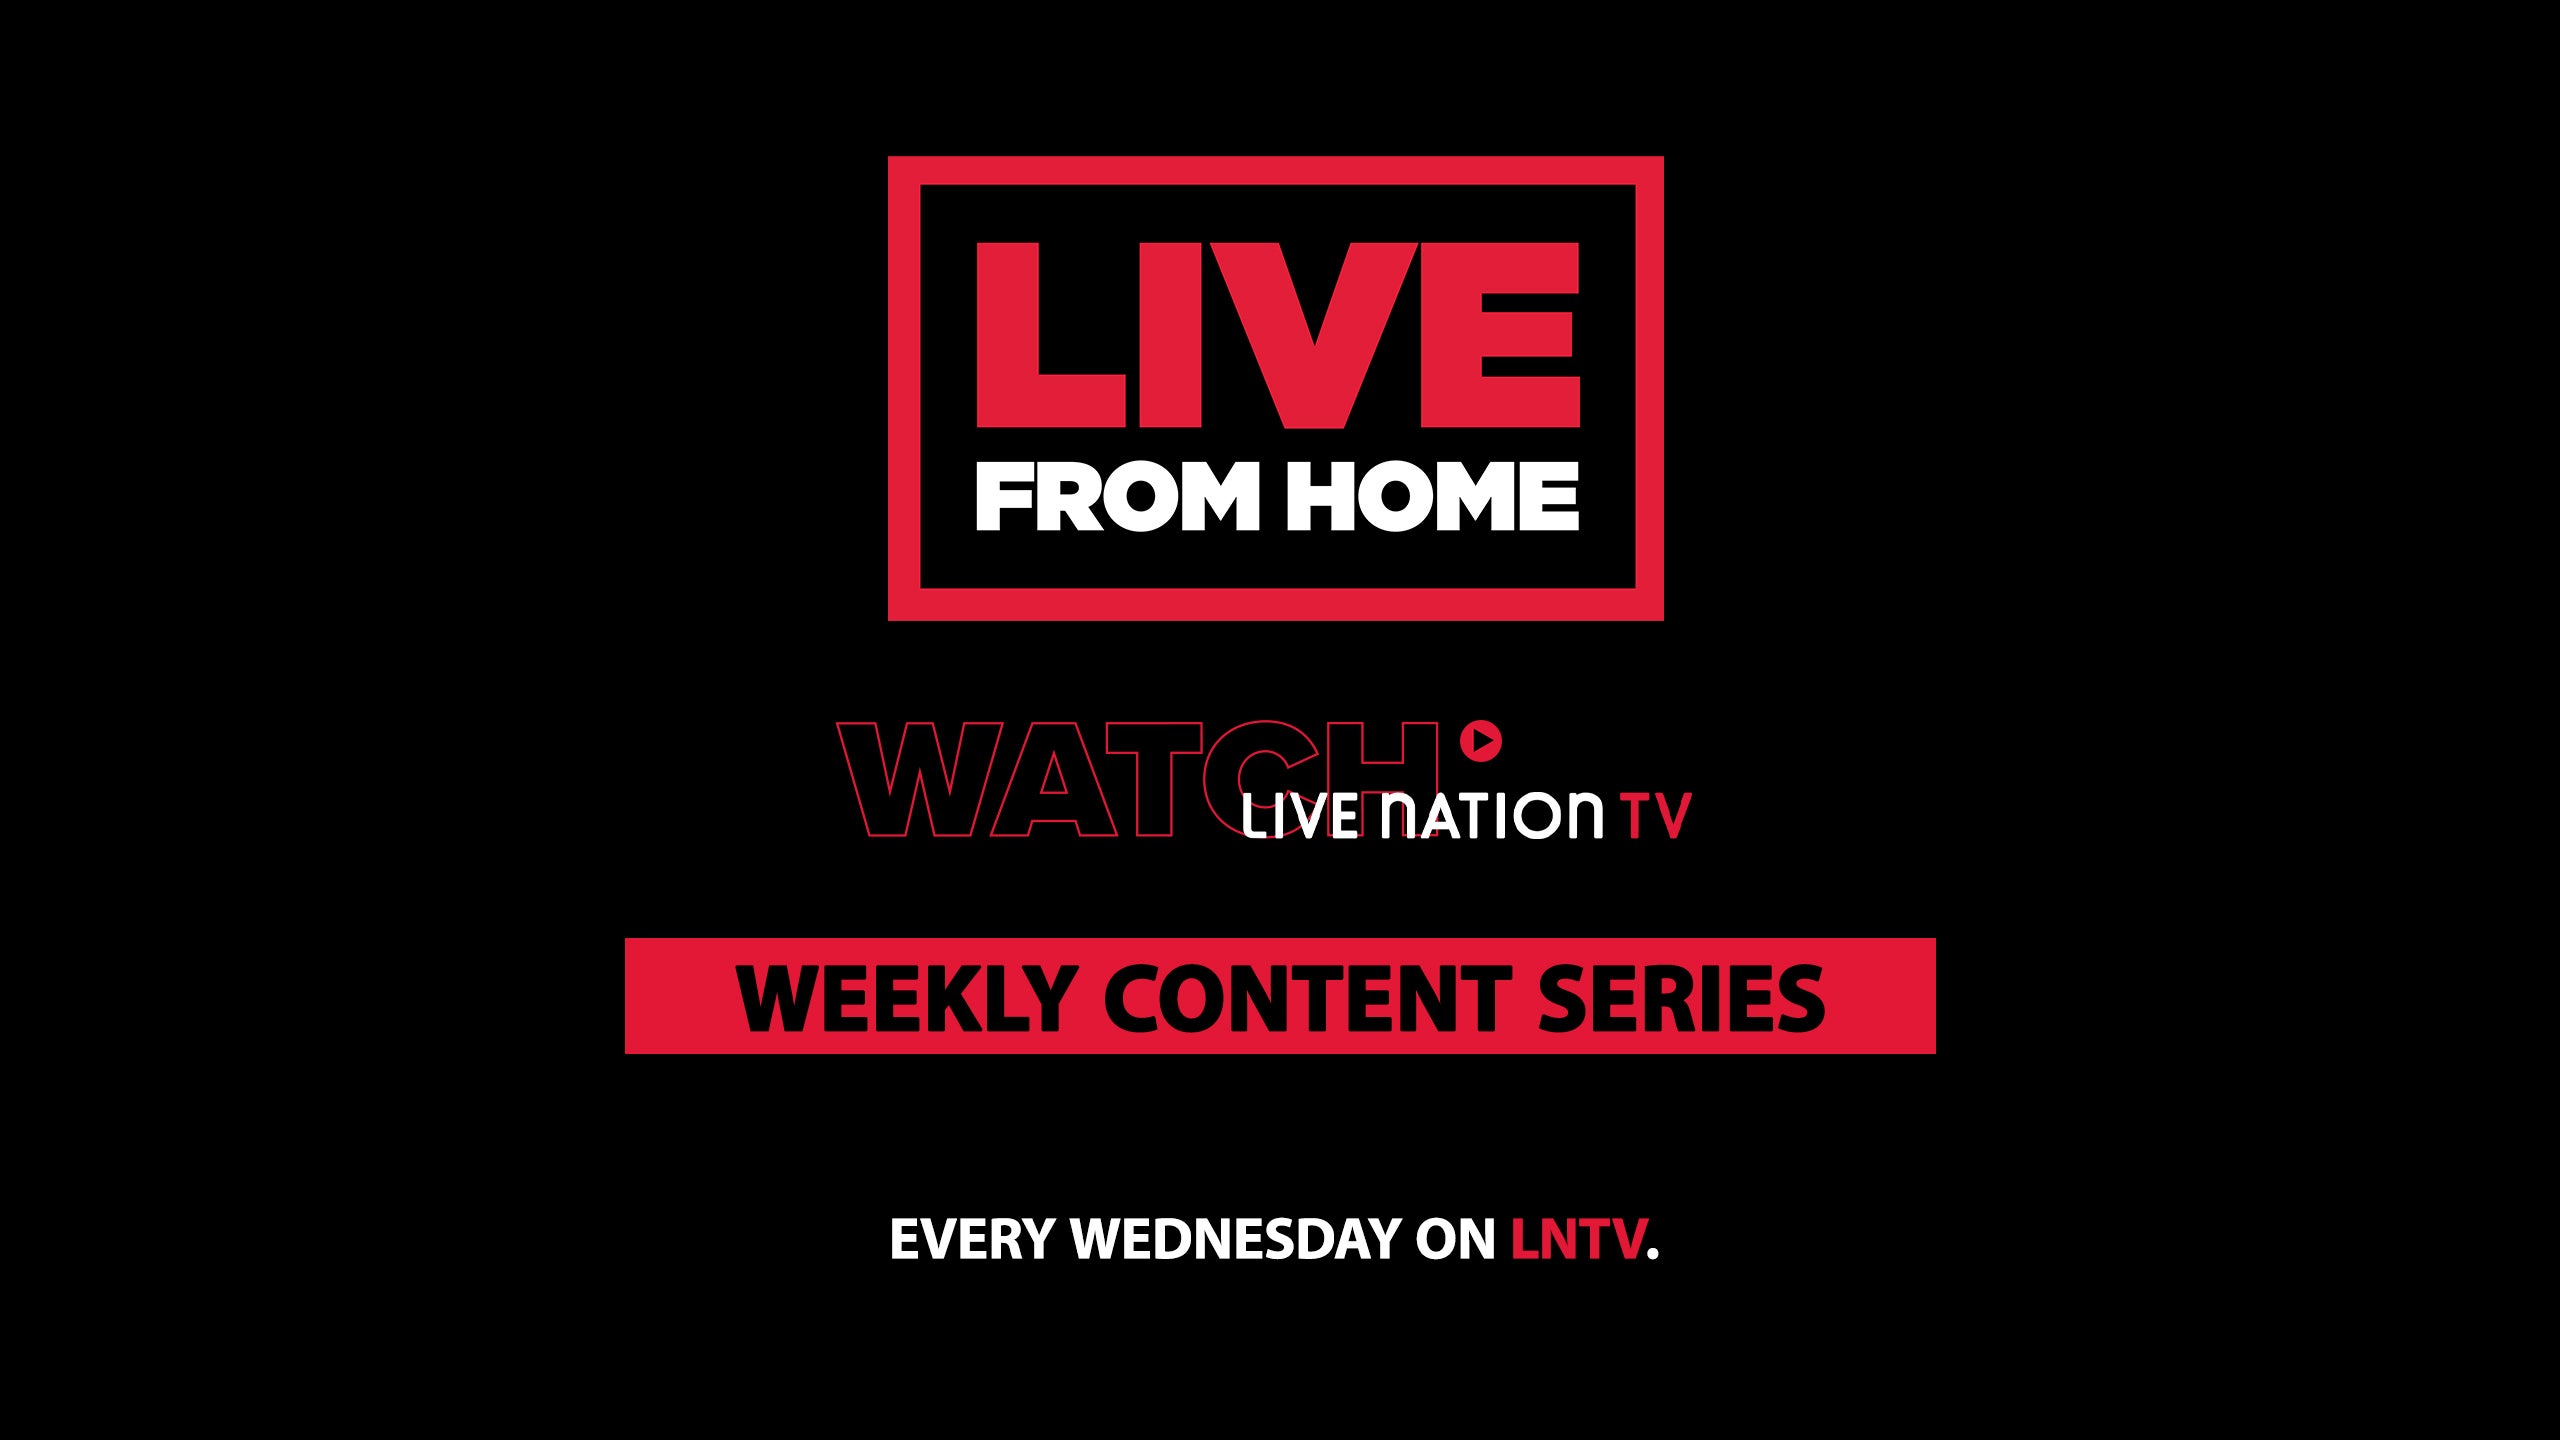 NEW: LNTV Live From Home Weekly Content Series (주간 컨텐츠 시리즈)